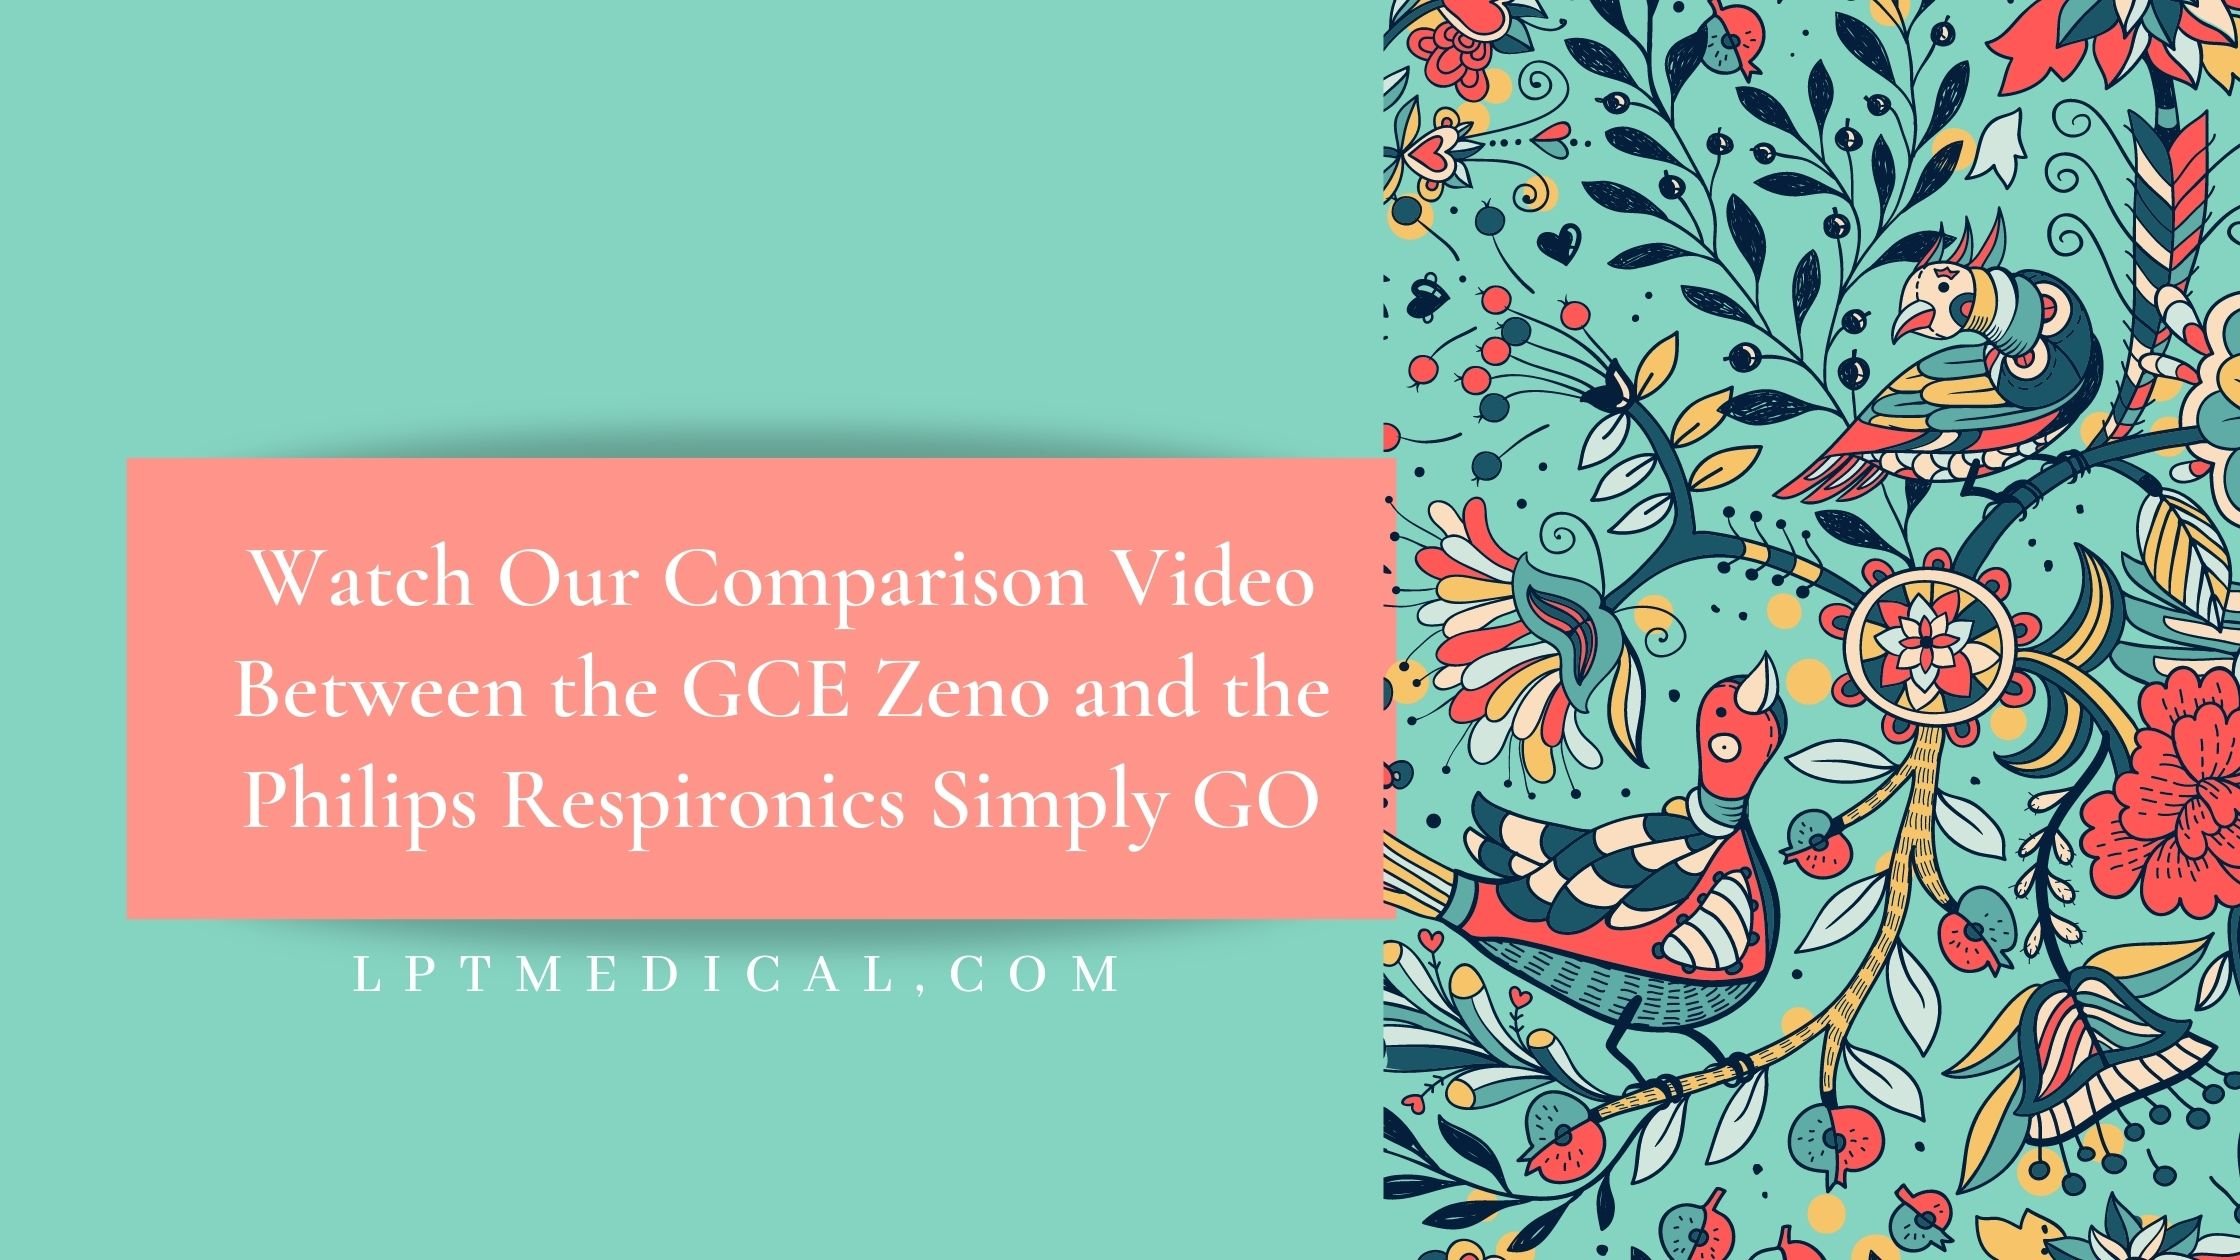 Watch Our Comparison Video Between the GCE Zeno and the Philips Respironics Simply GO